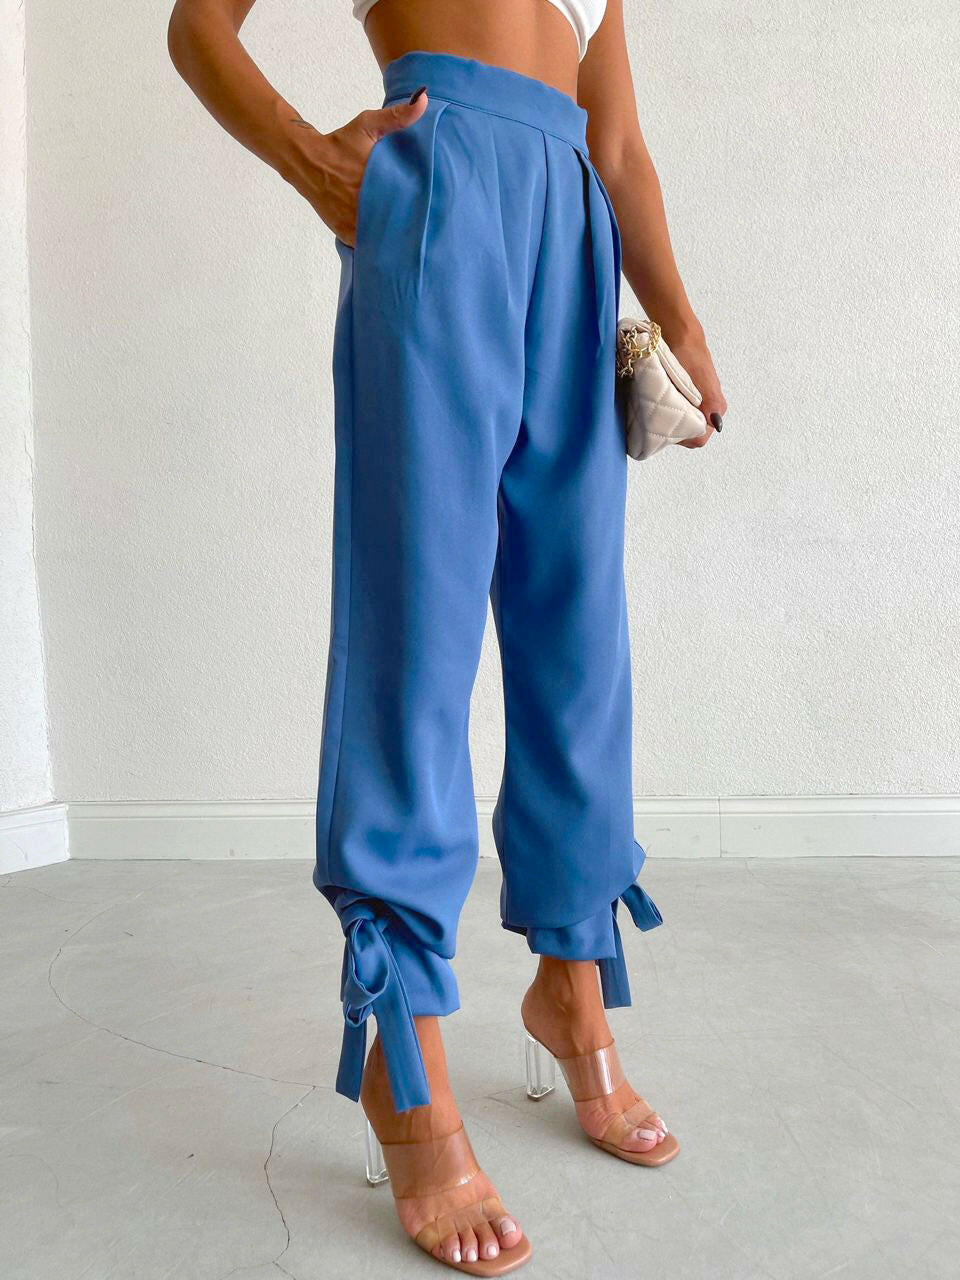 Ankle Tie High Waisted Trousers in Saxe Blue - Noxlook